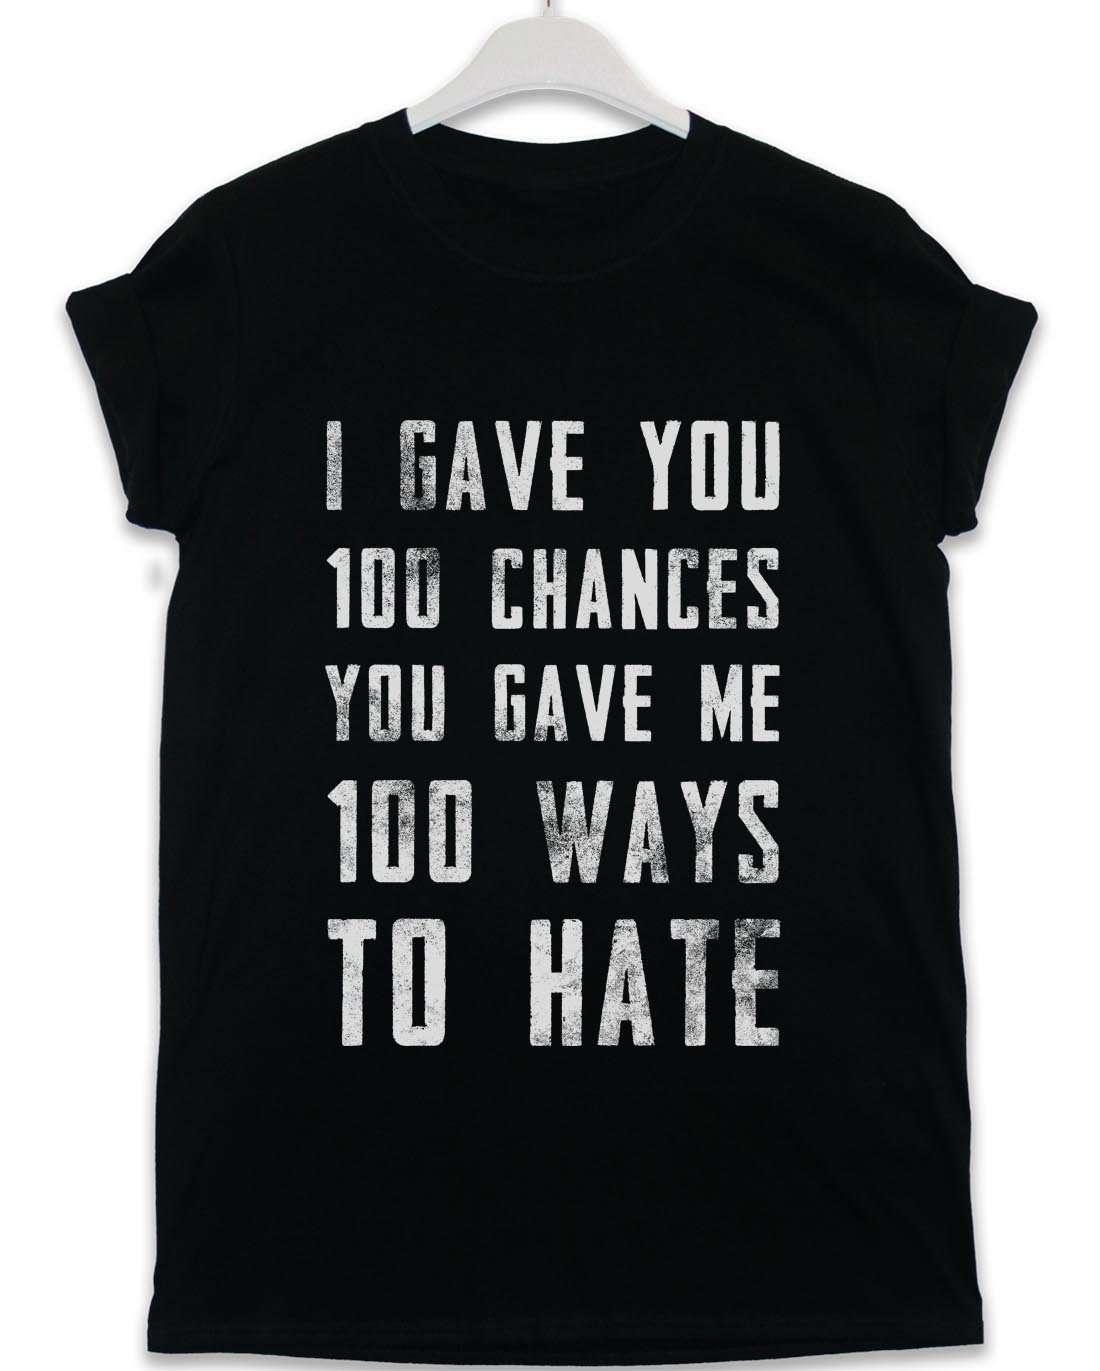 100 Ways to Hate Lyric Quote Graphic T-Shirt For Men 8Ball